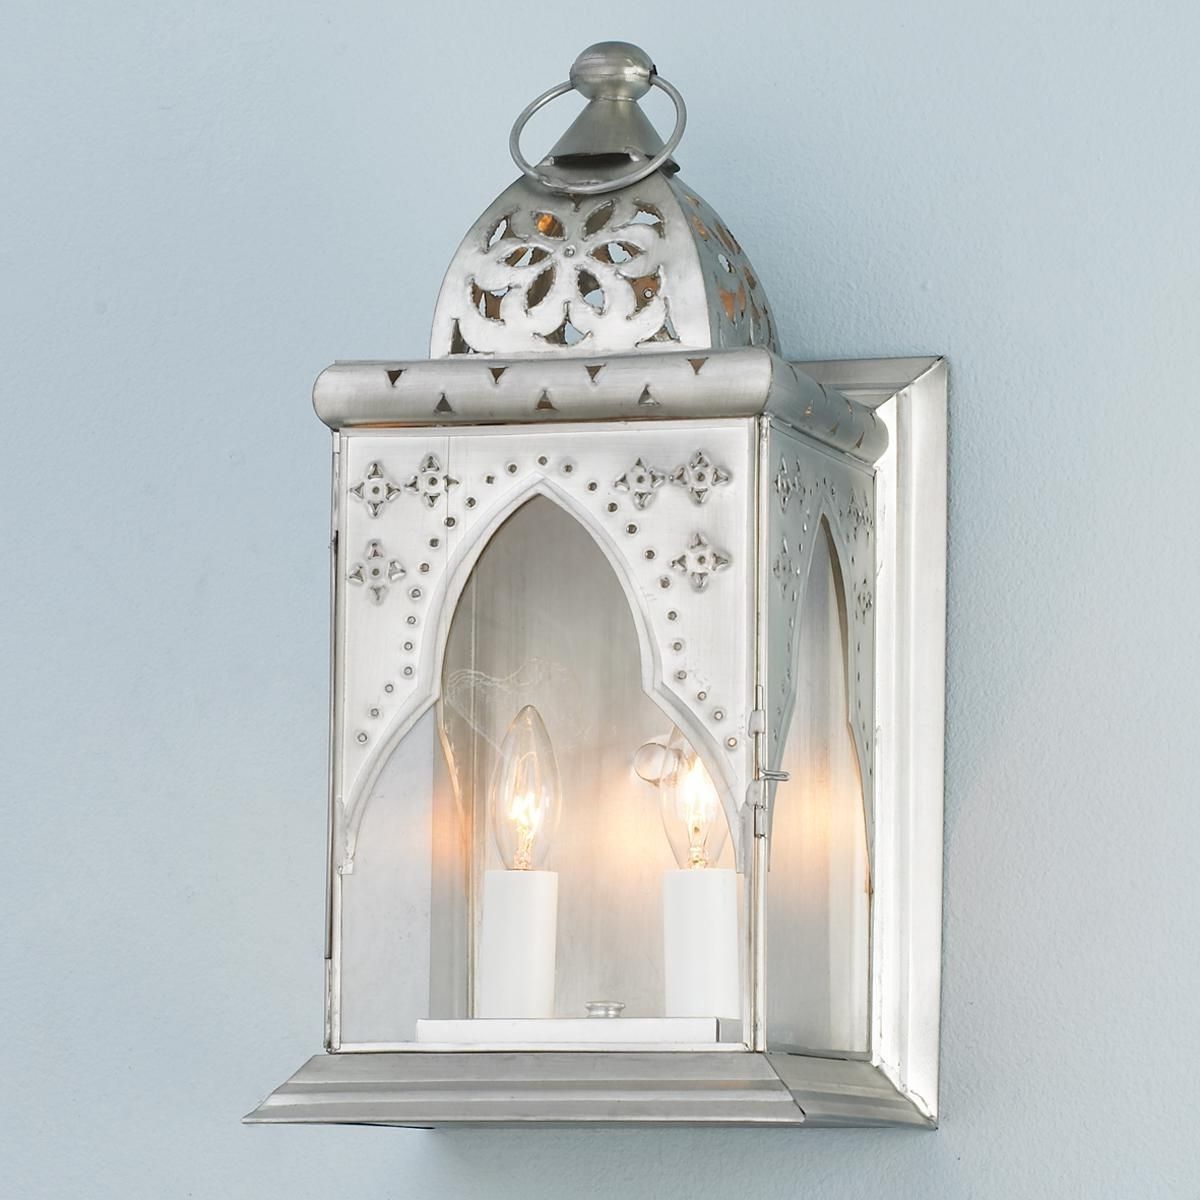 Moroccan Outdoor Electric Lanterns For Most Up To Date Moroccan Arch Wall Lantern Sconce Moroccan Arch, Whimsical Piercings (View 1 of 20)